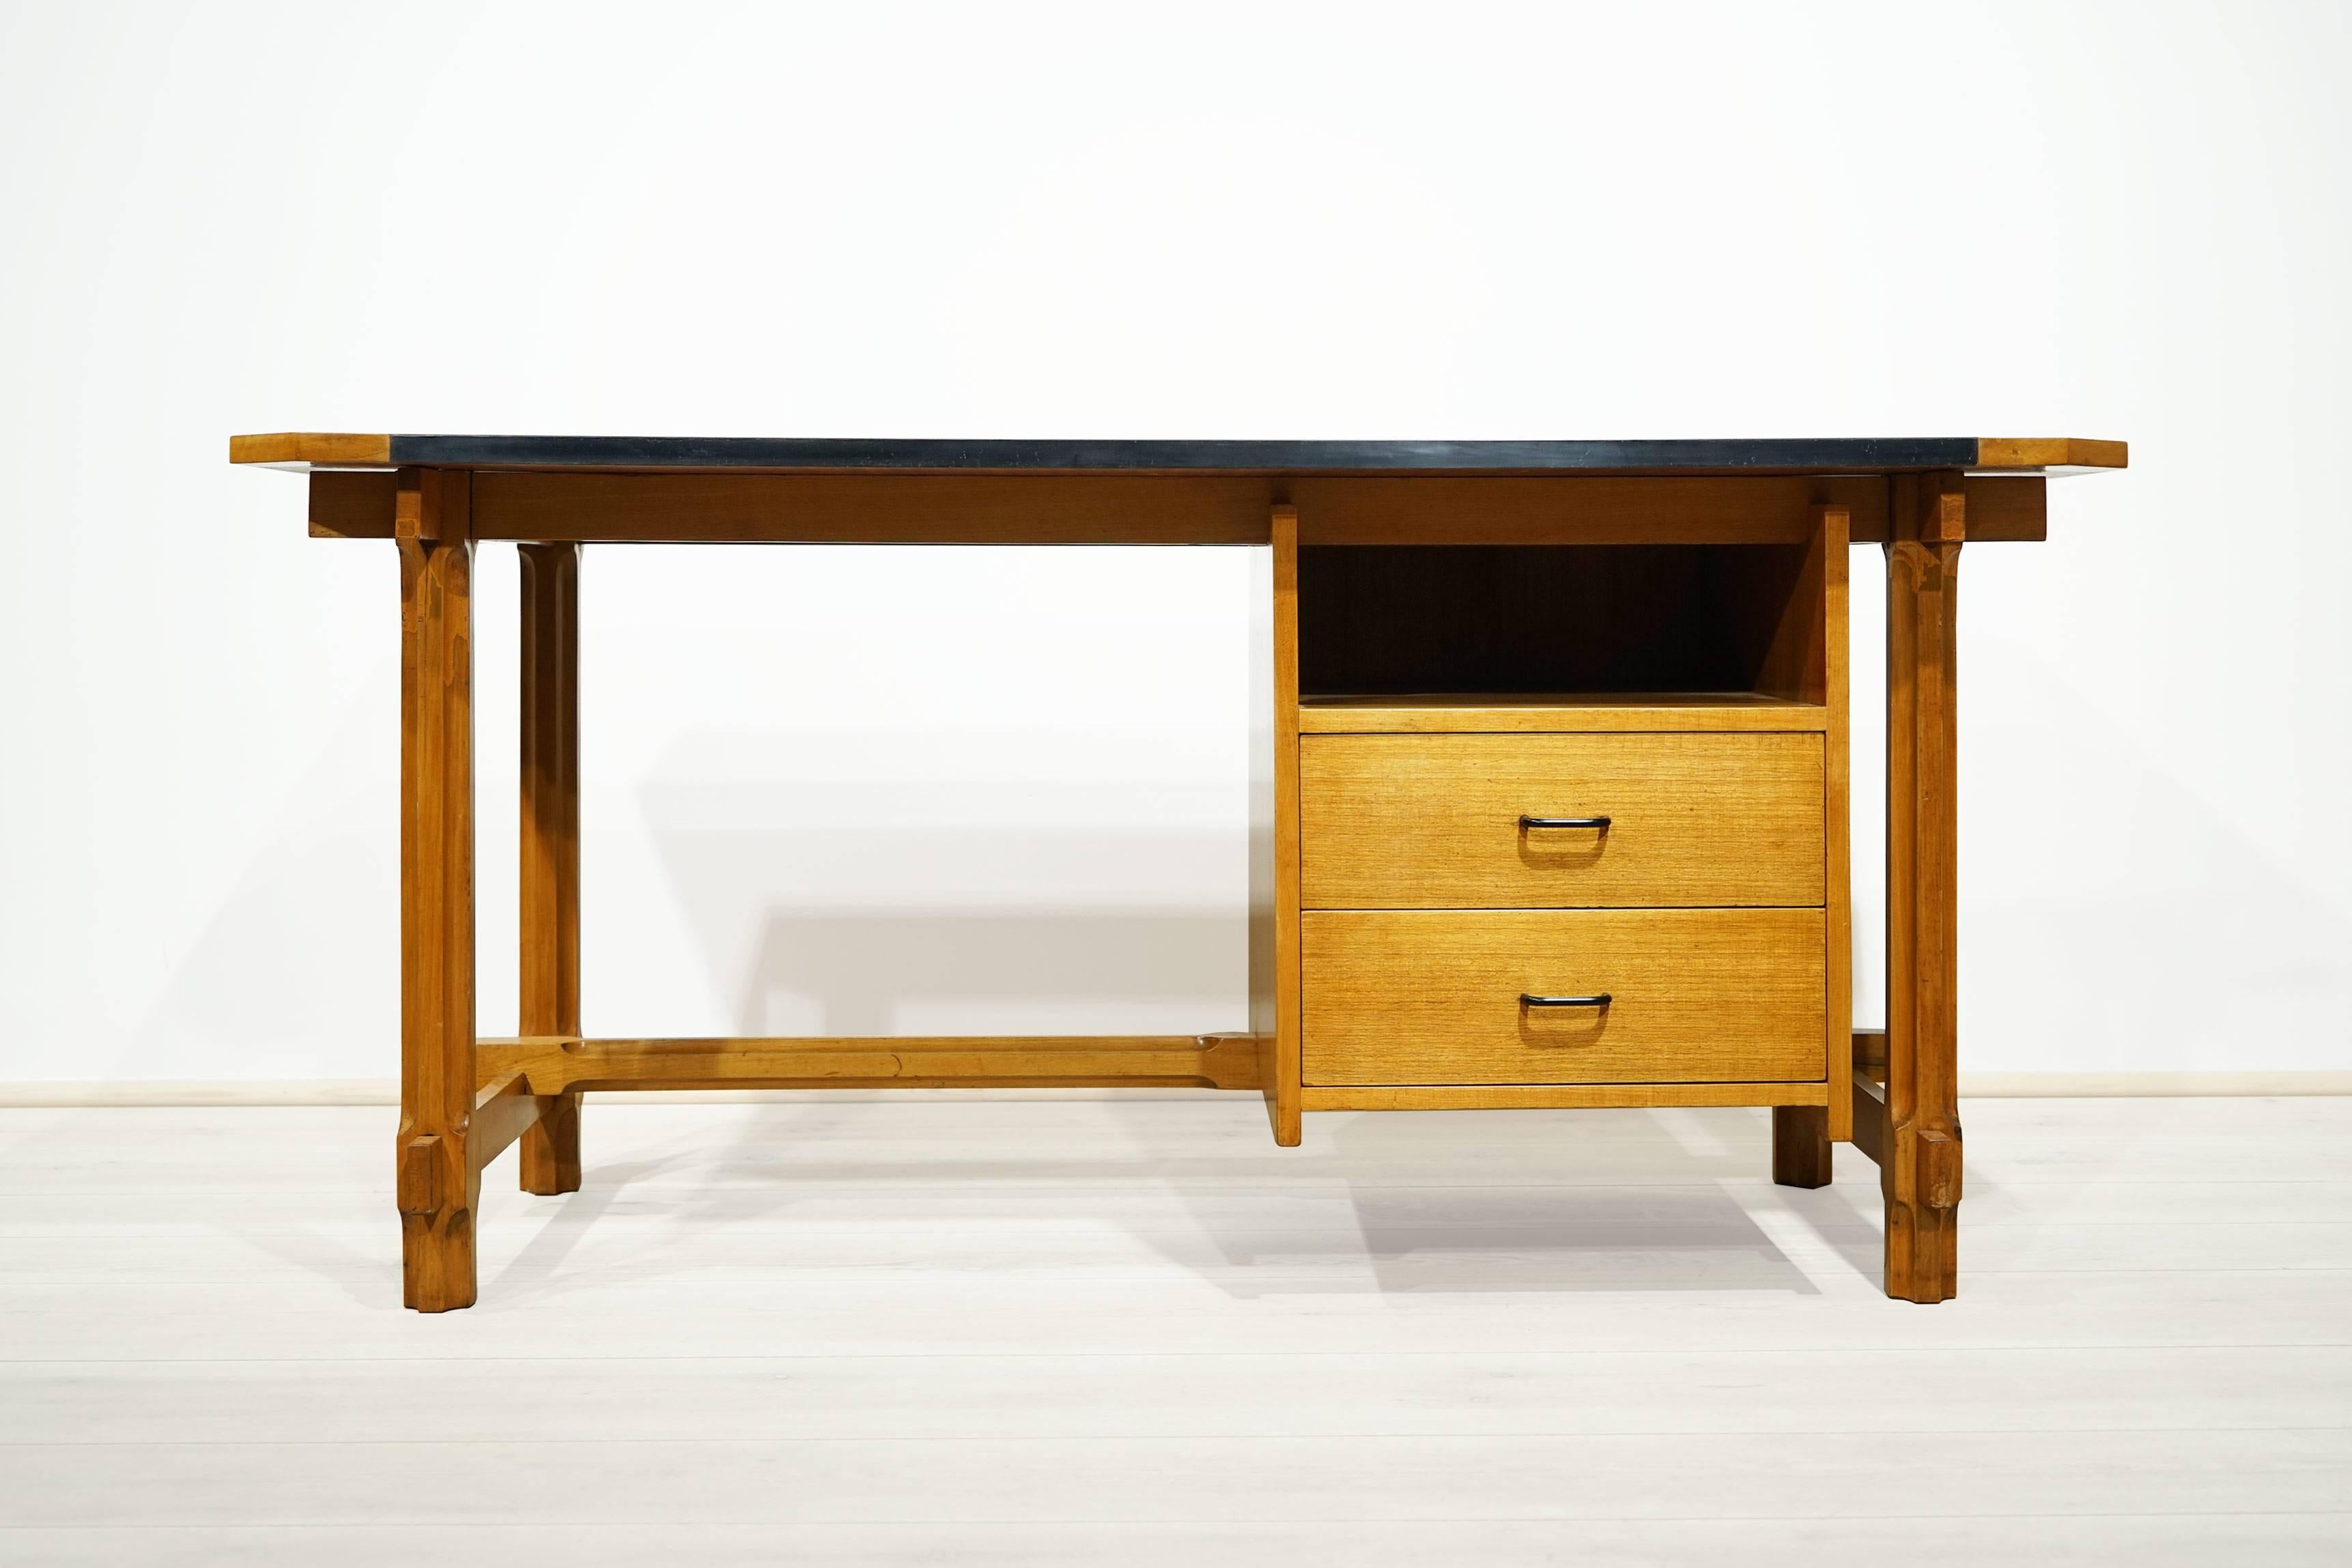 The desk is designed by Ico Parisi, manufactured by Fratelli Rizzi, Cantù 1959